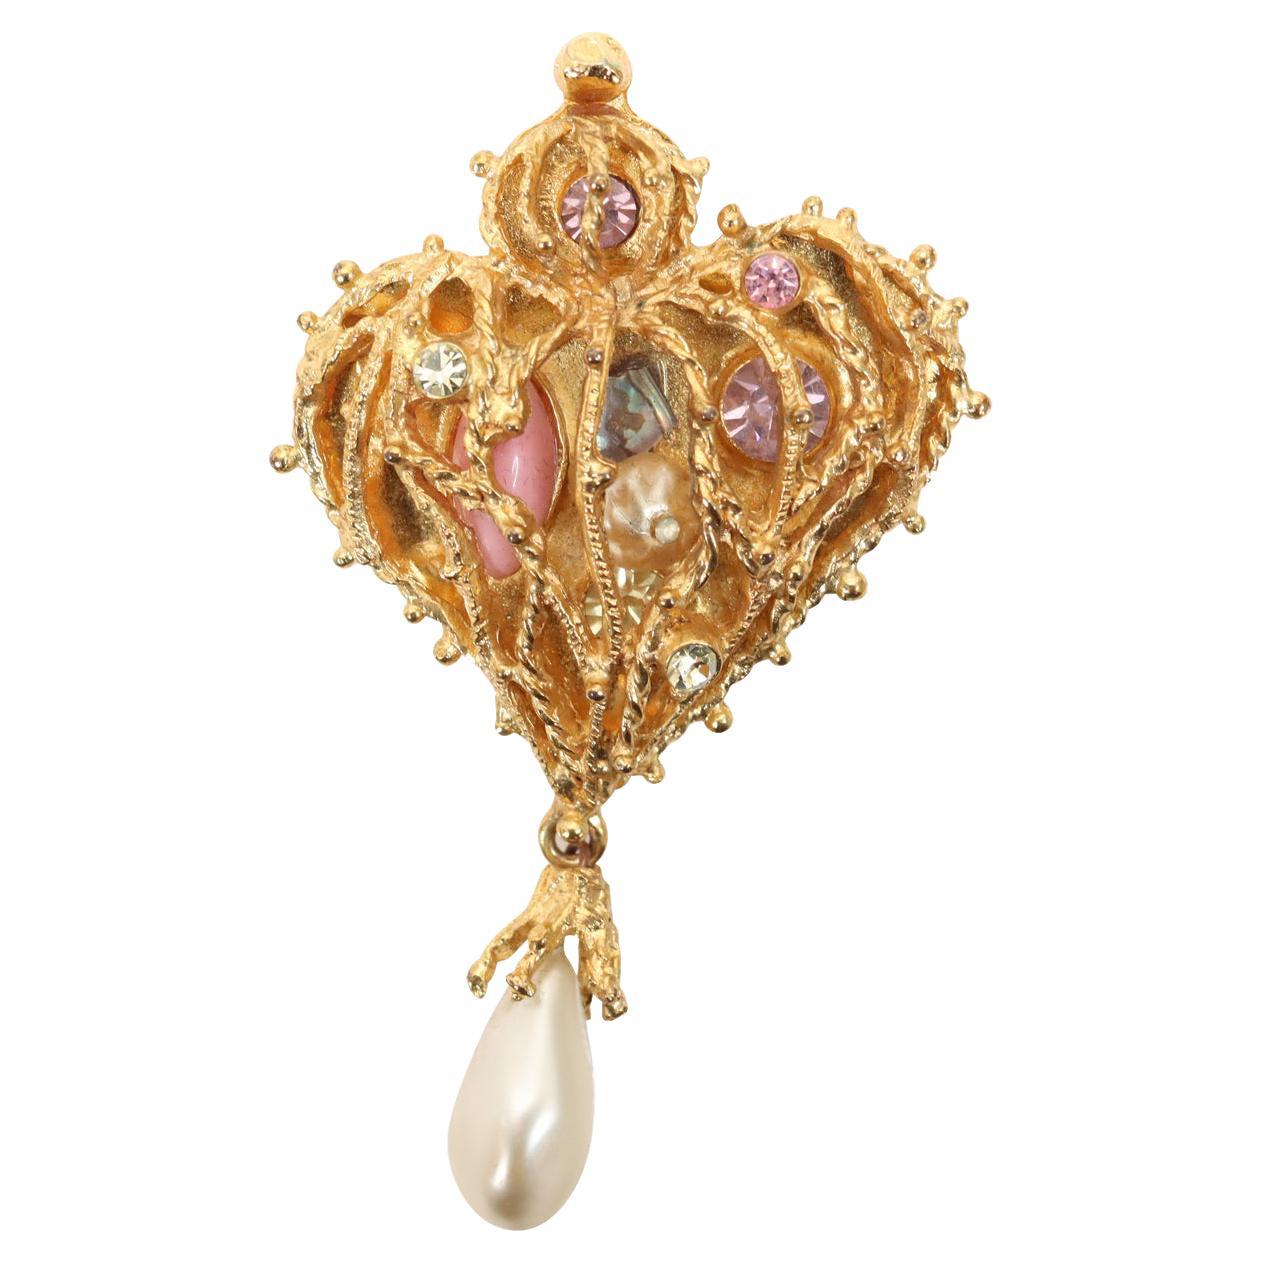 Vintage Christian Lacroix Dangling Gold Tone Pearl Brooch Circa 1990s